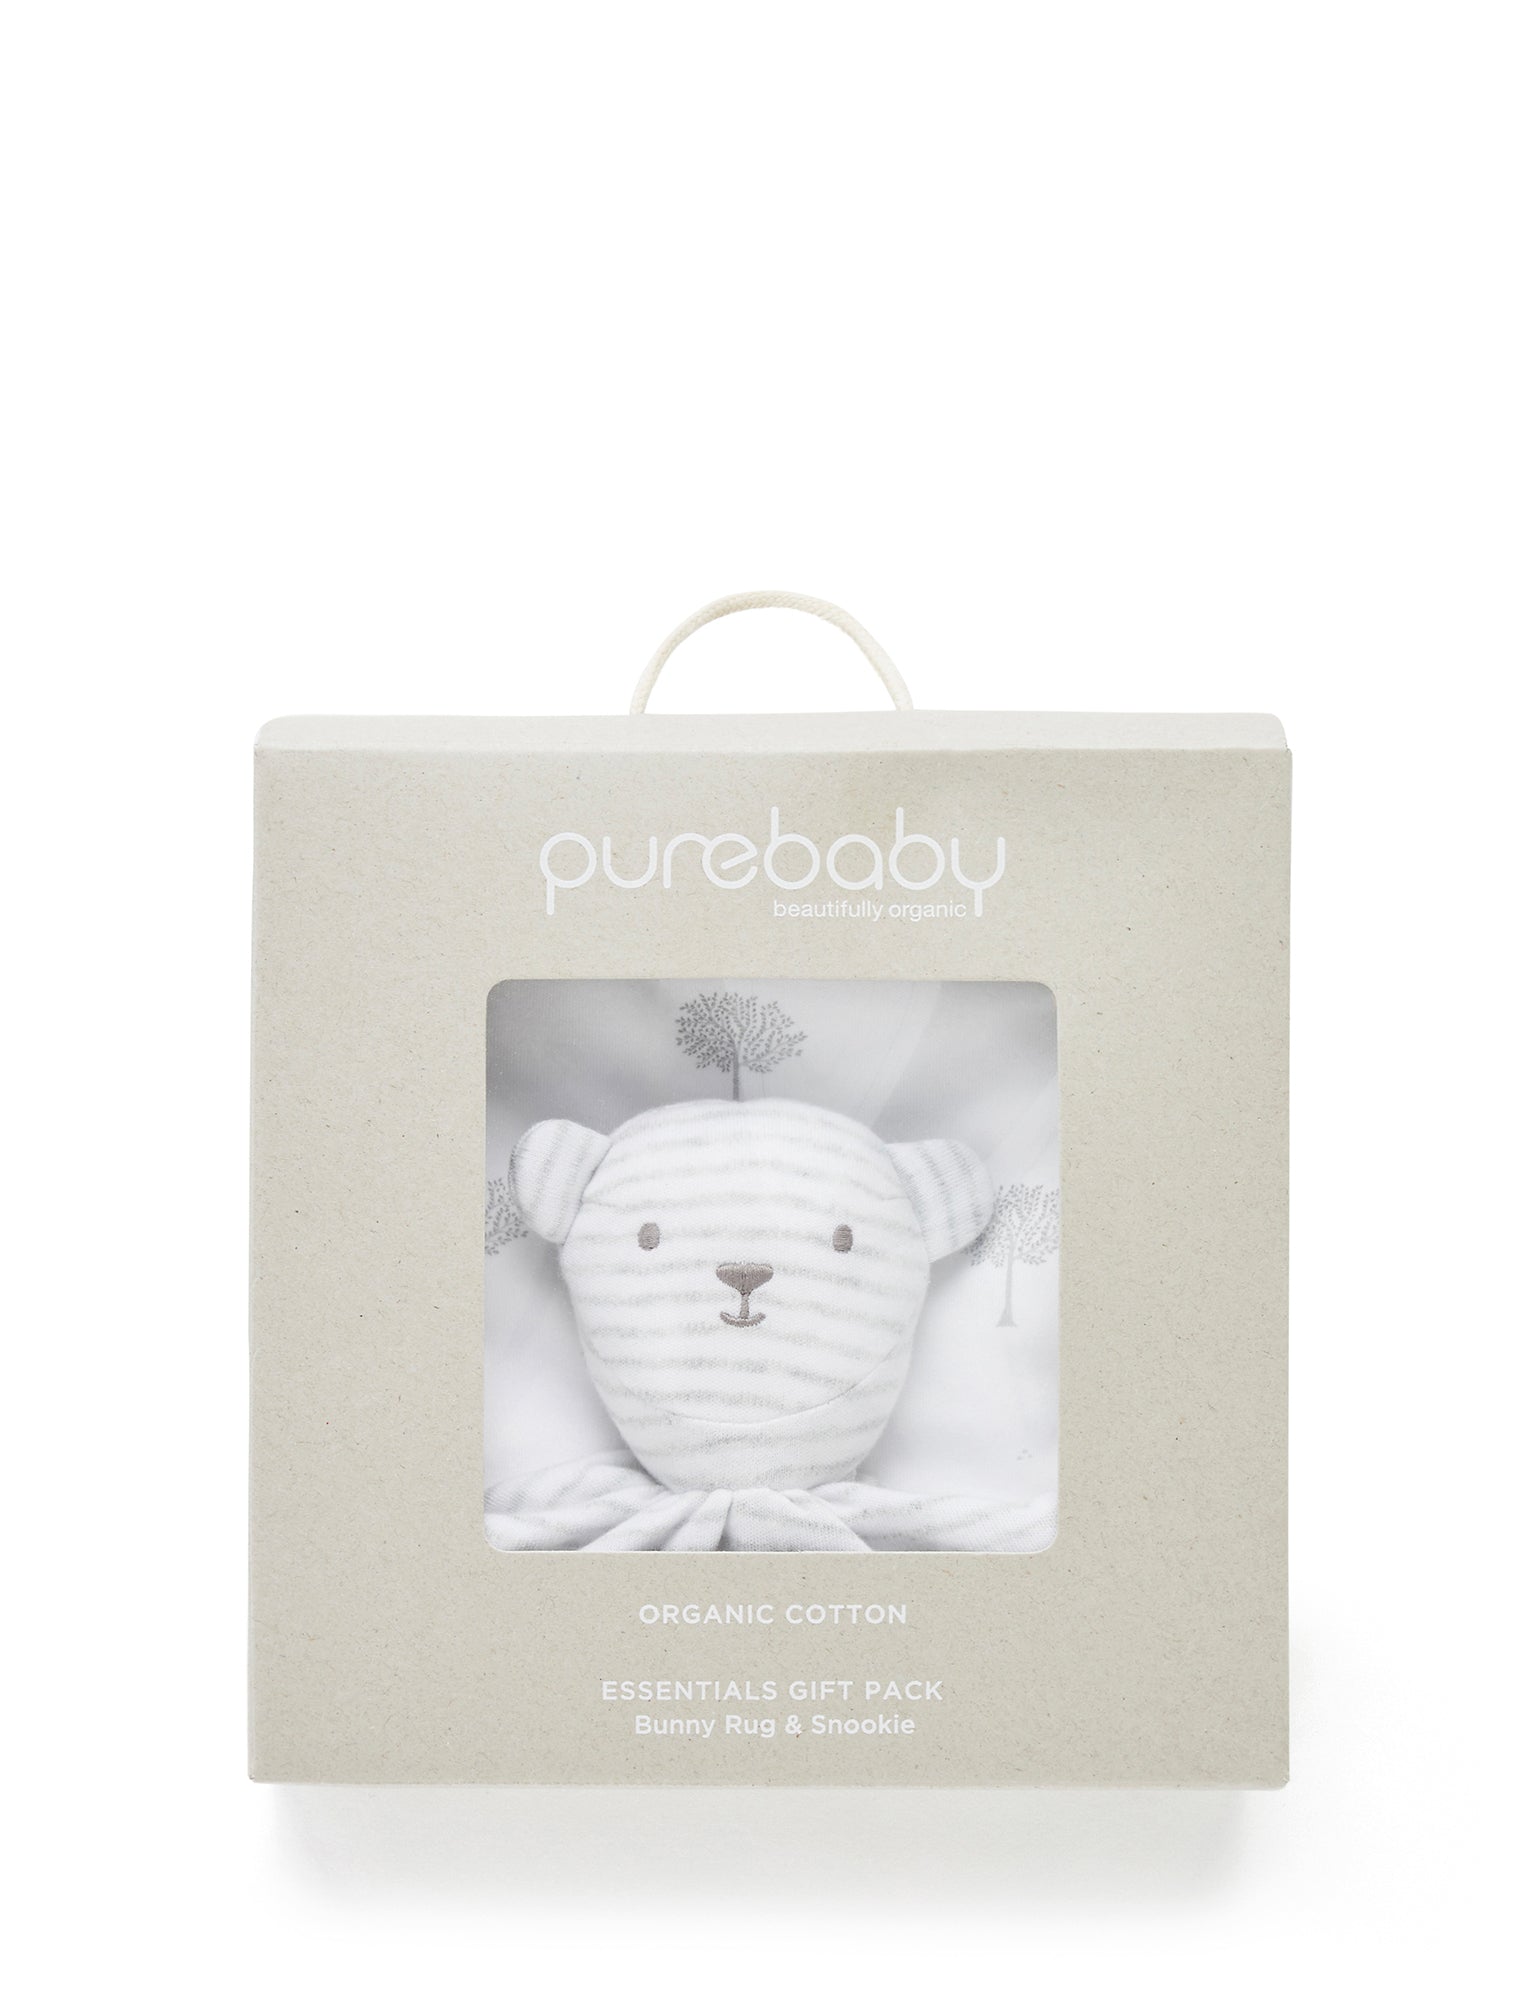 Purebaby Bunny Rug and Snookie Pack